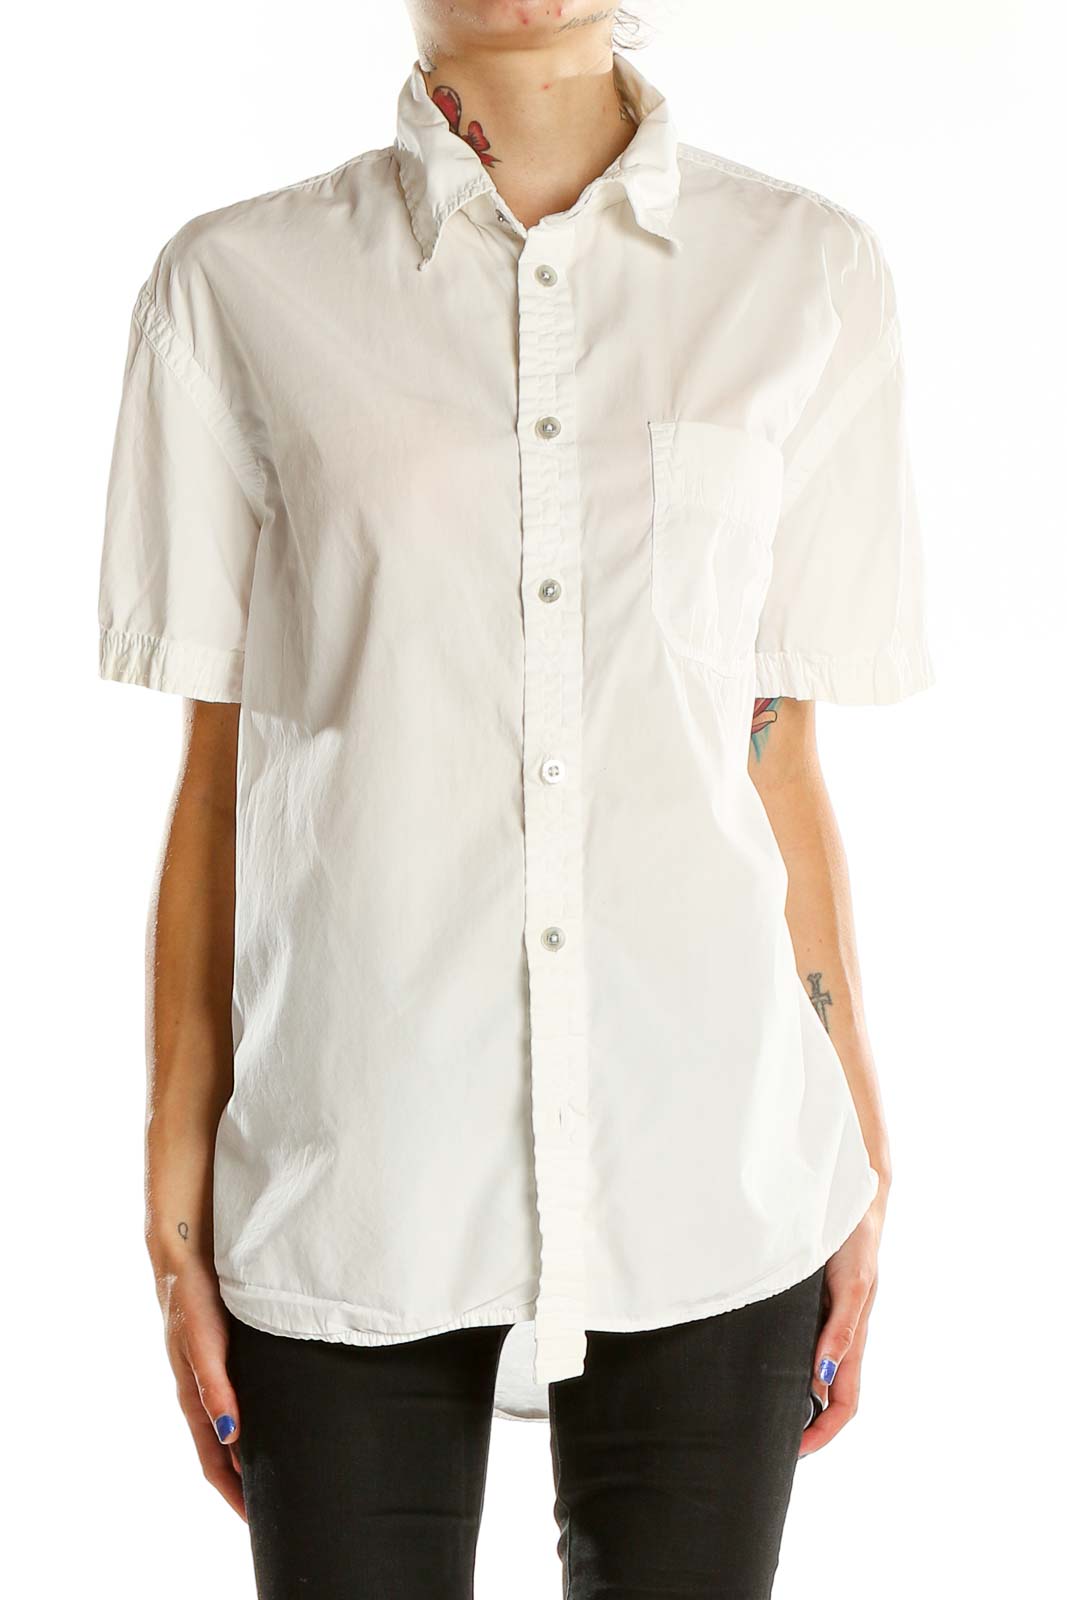 White Button Up Short Sleeve Shirt Front